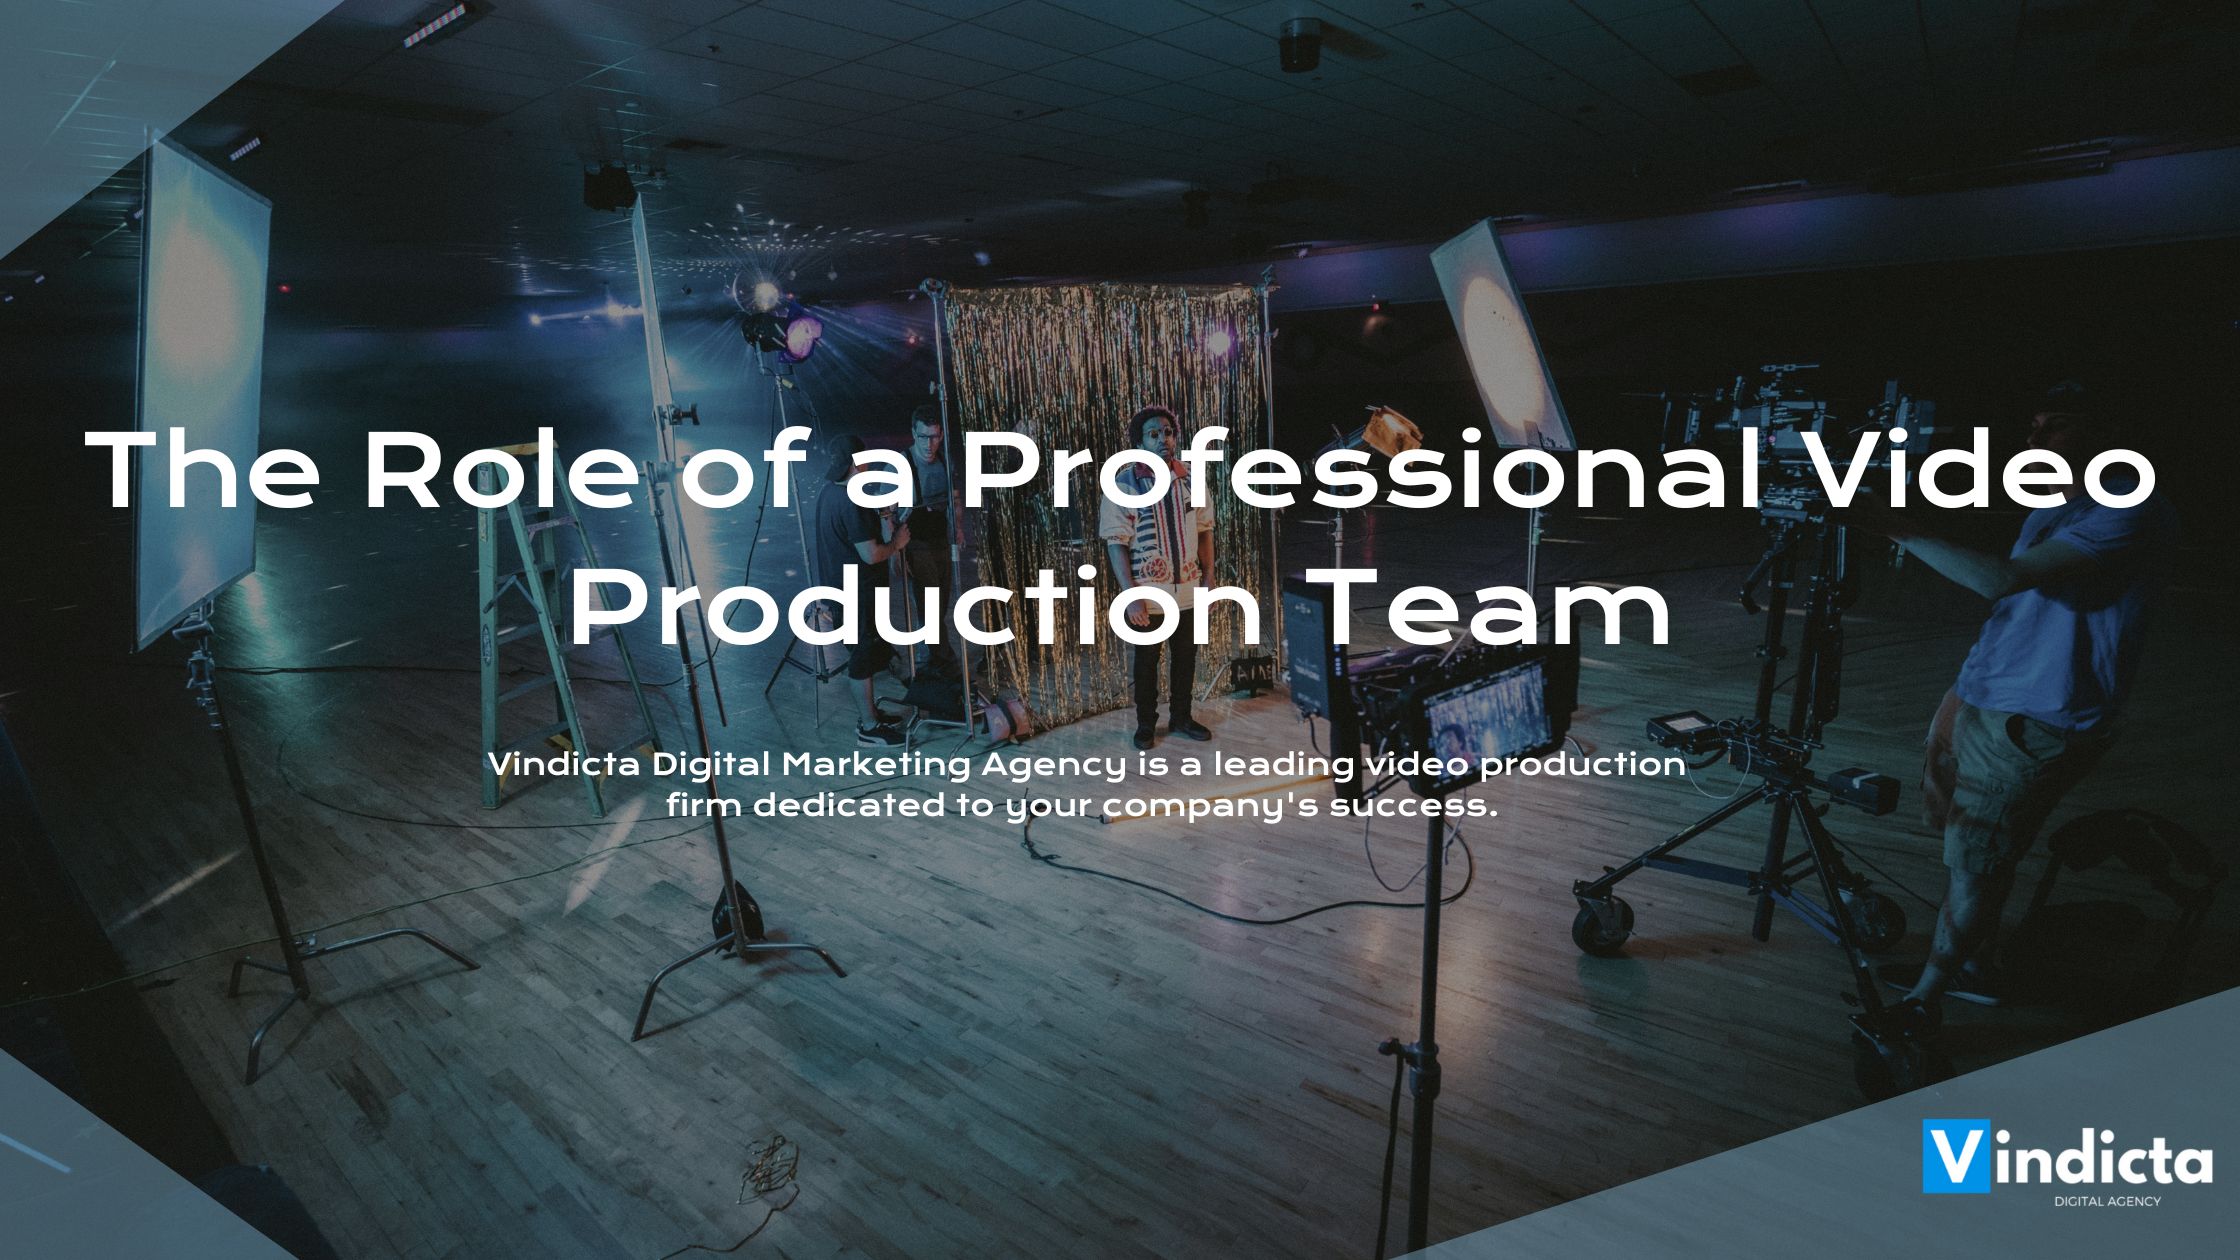 The Role of a Professional Video Production Team